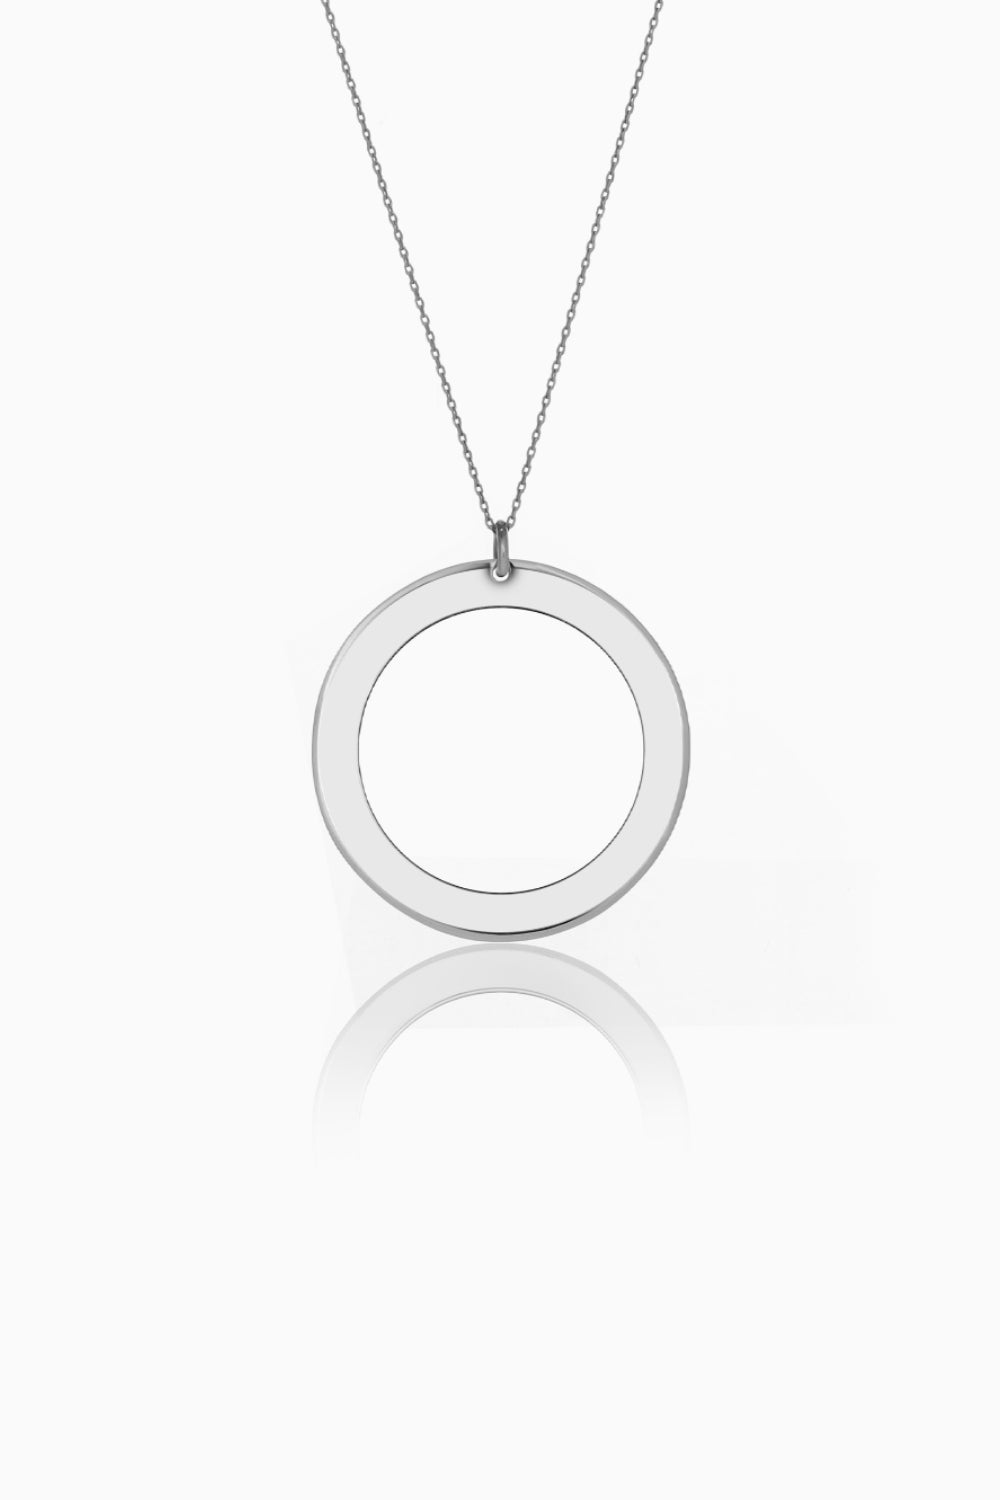 Necklace SOLID CIRCLE 925 silver